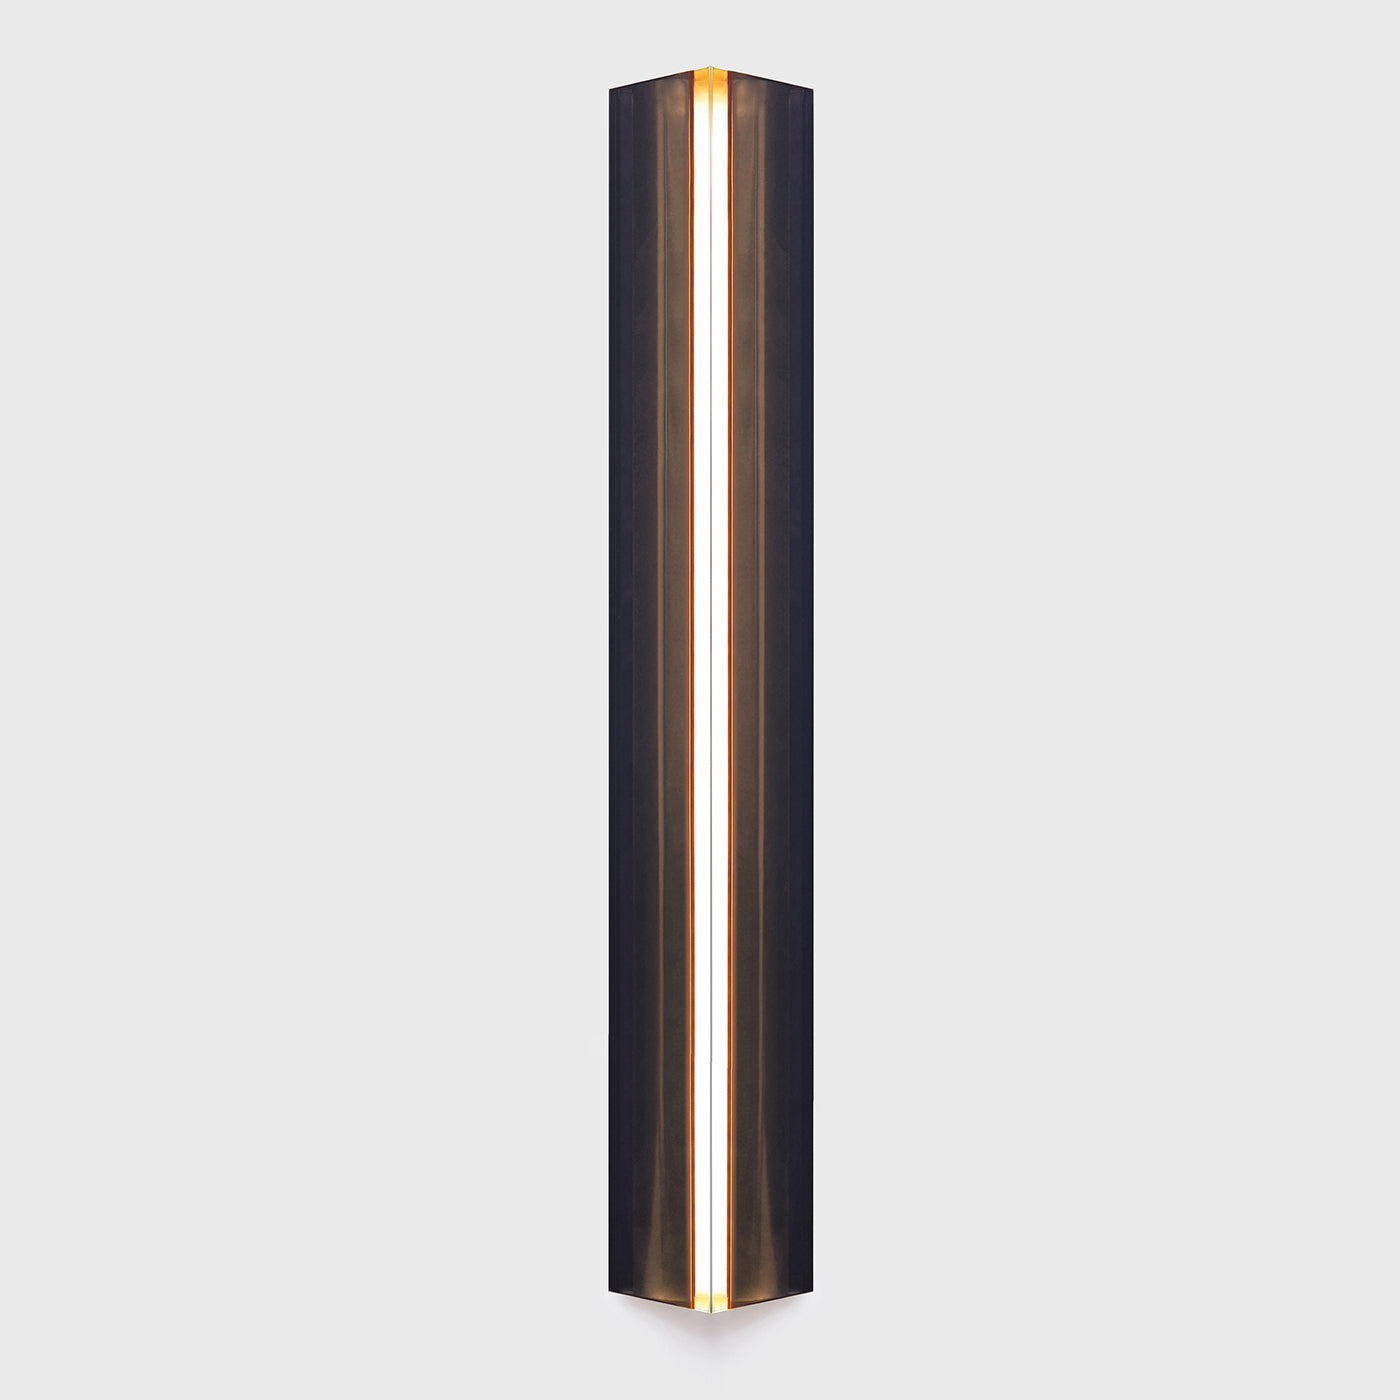 Spettro Tall Black and Steel Sconce - Alternative view 2